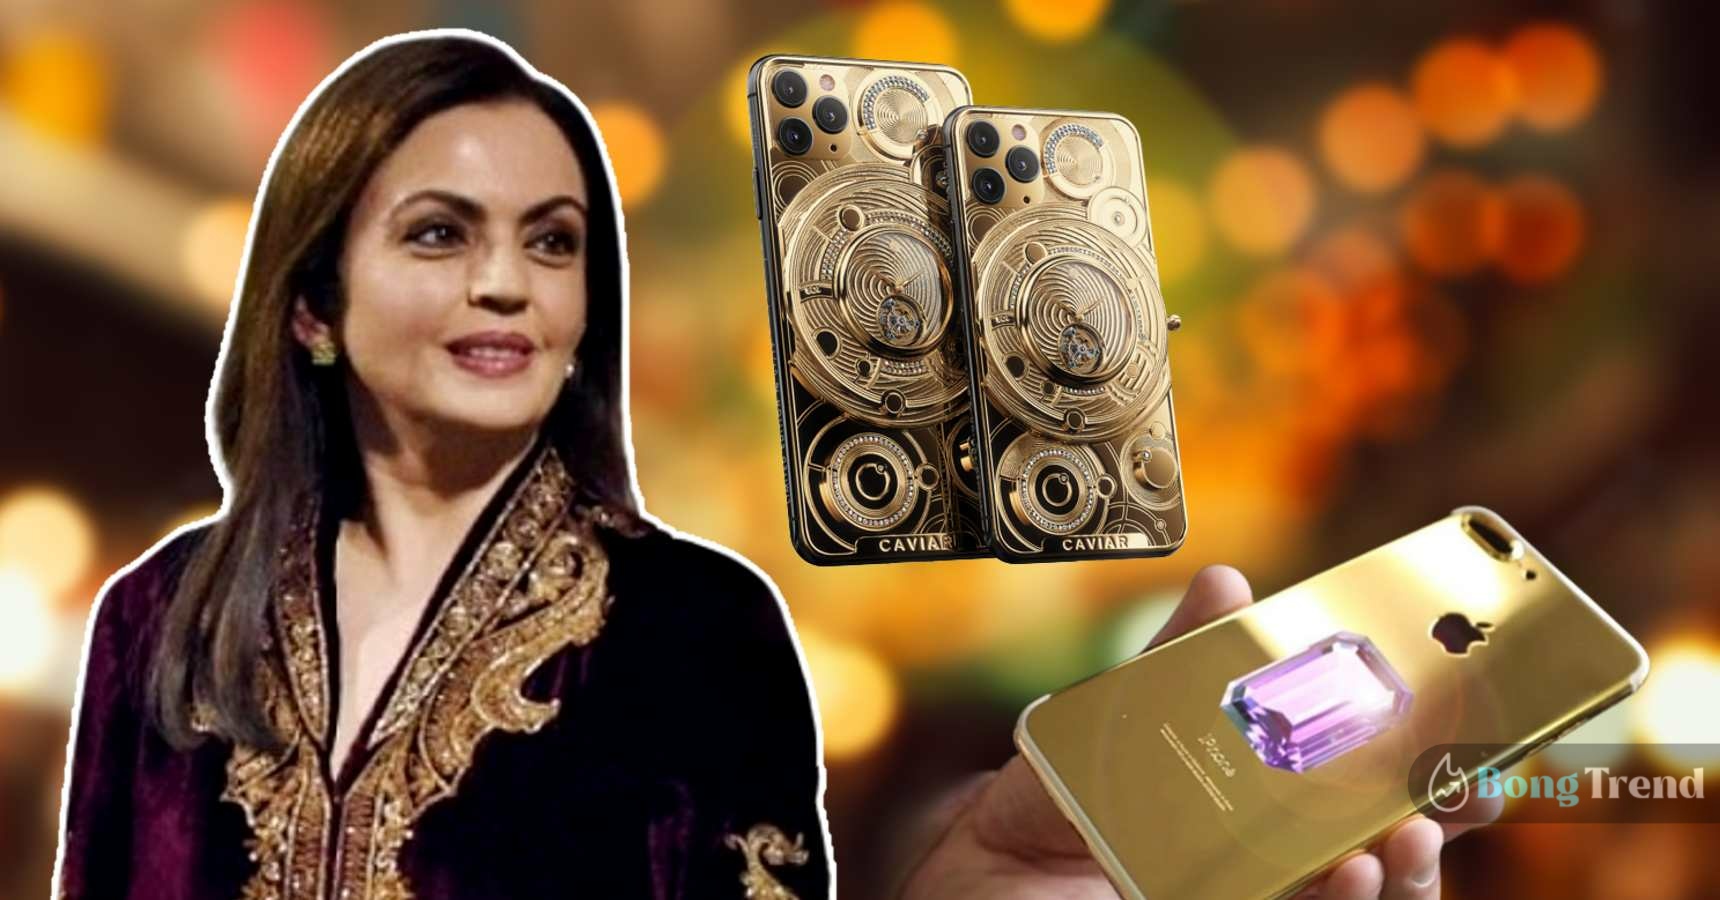 Nita Ambani's YSL Tribute Sandals Collection: From Rs. 77K Black Heels To  Nude Heels Worth Rs. 80K